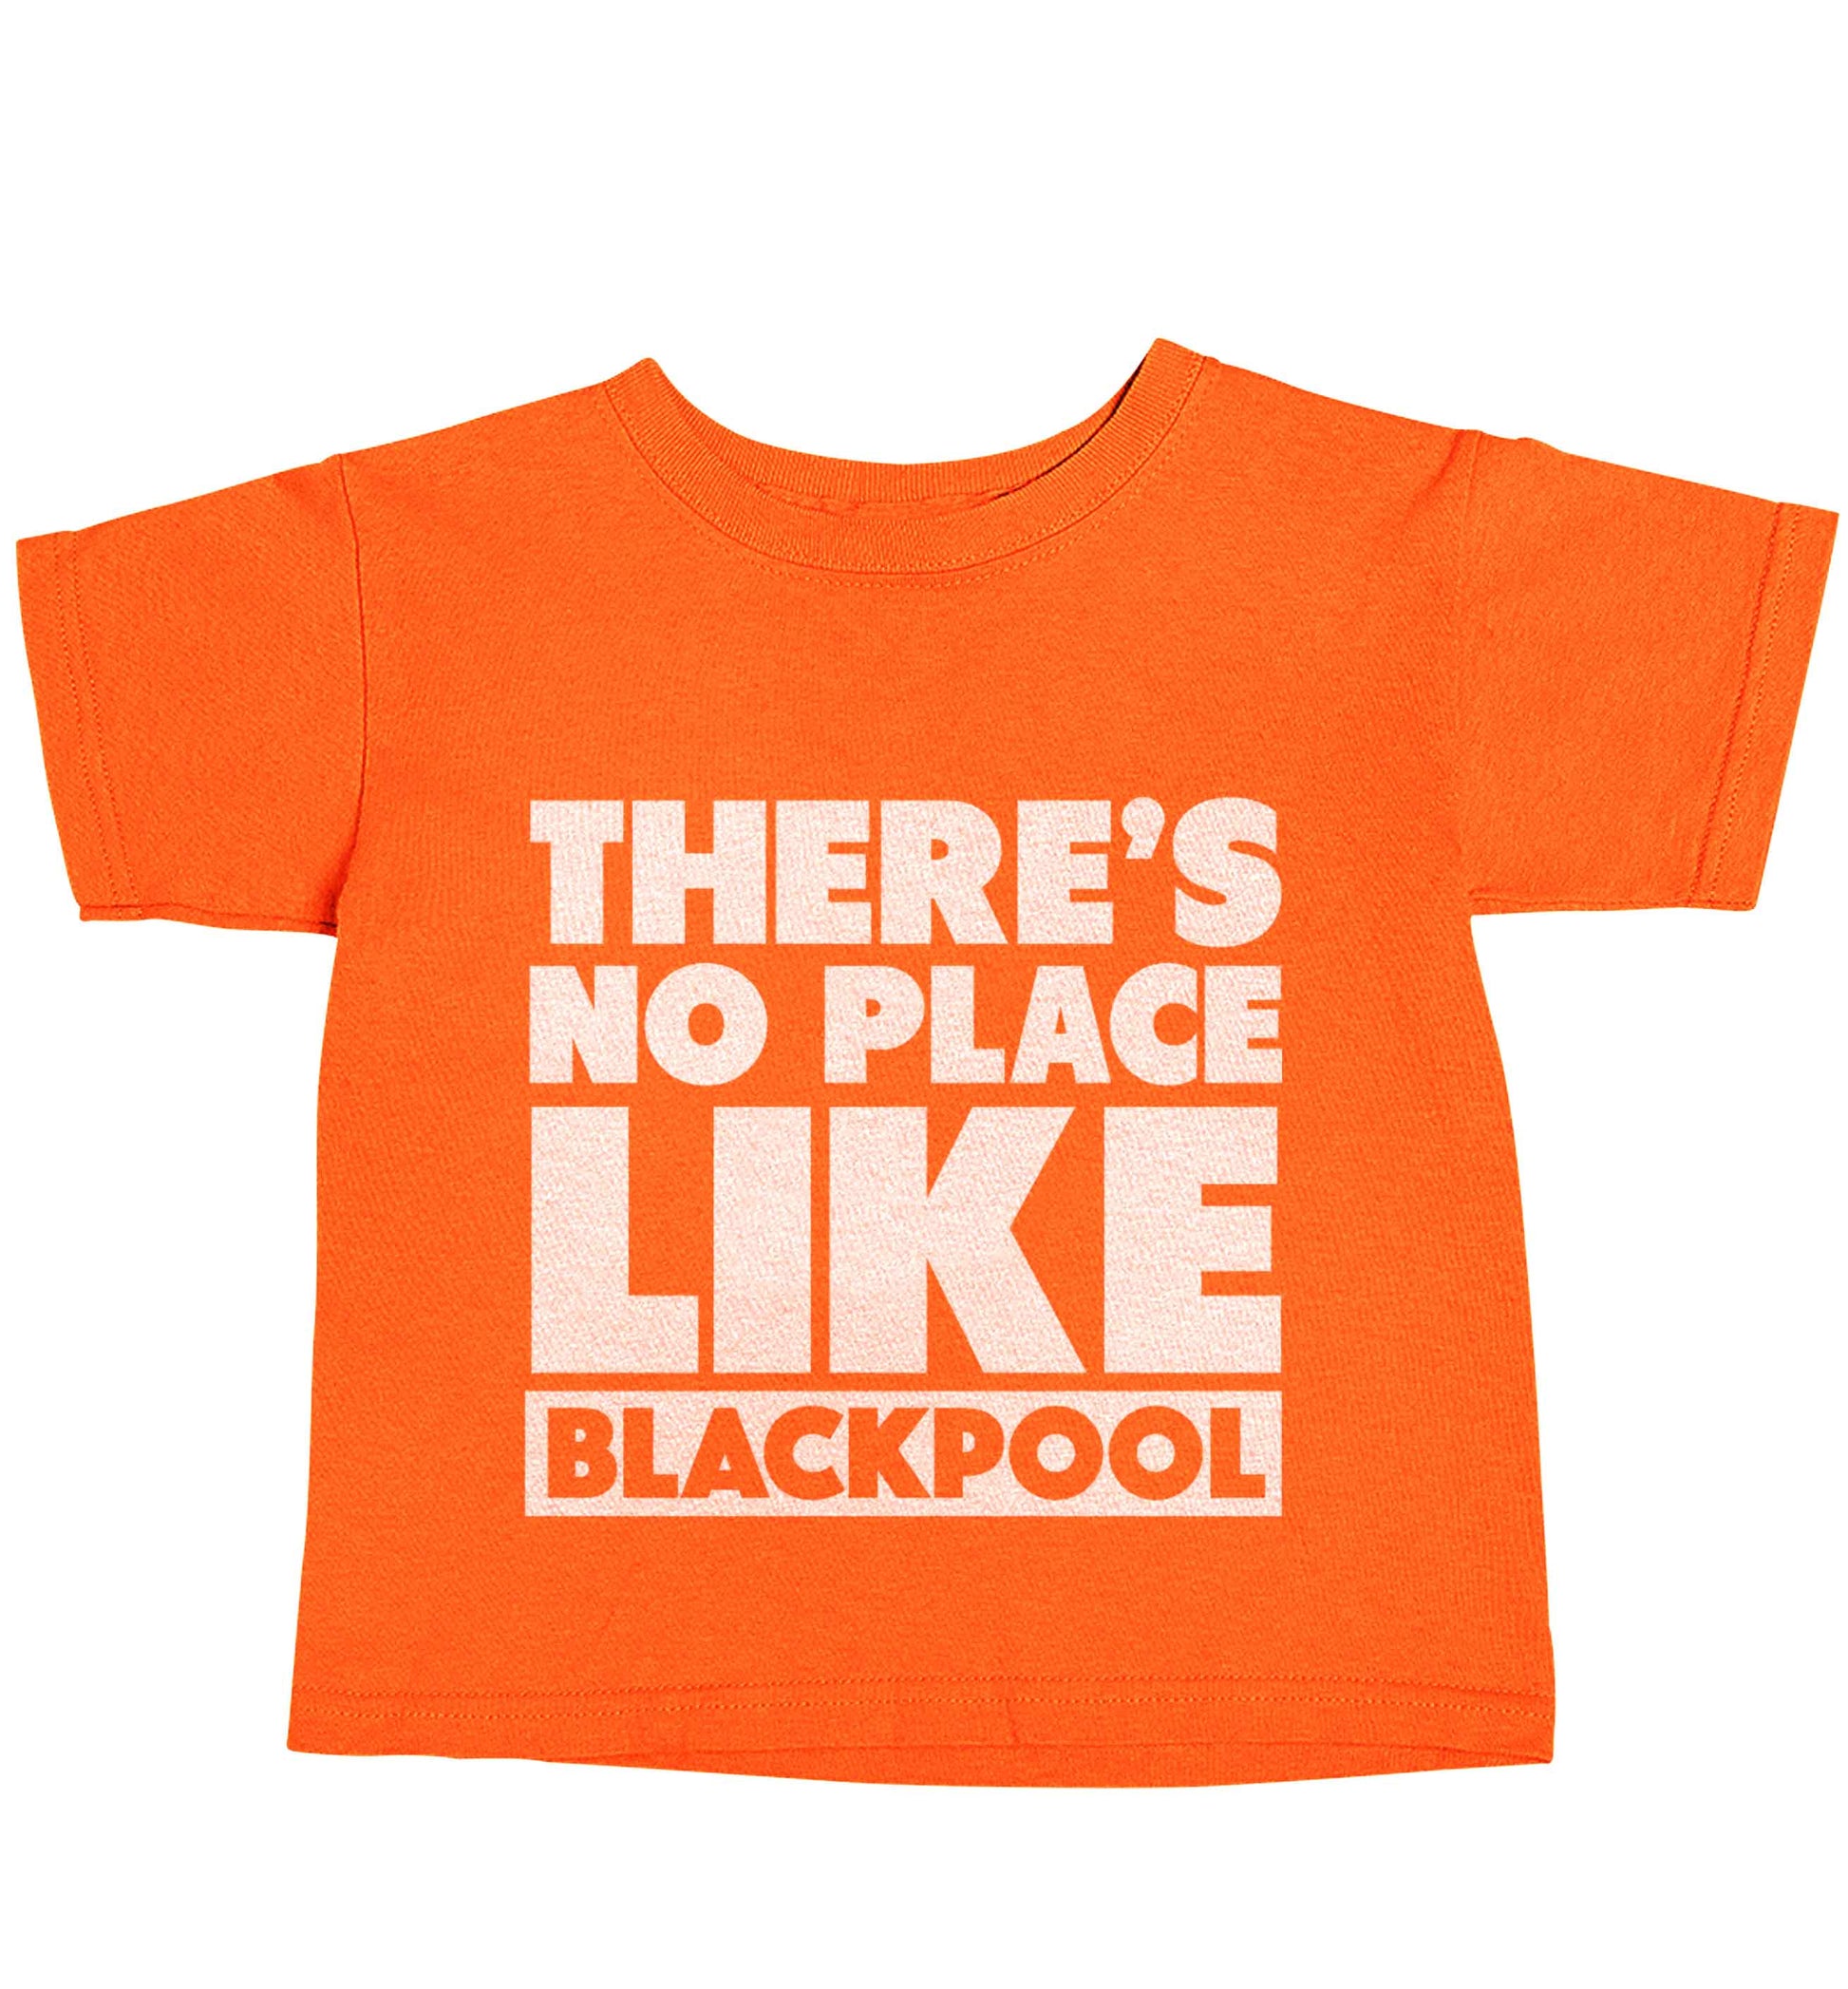 There's no place like Blackpool orange baby toddler Tshirt 2 Years